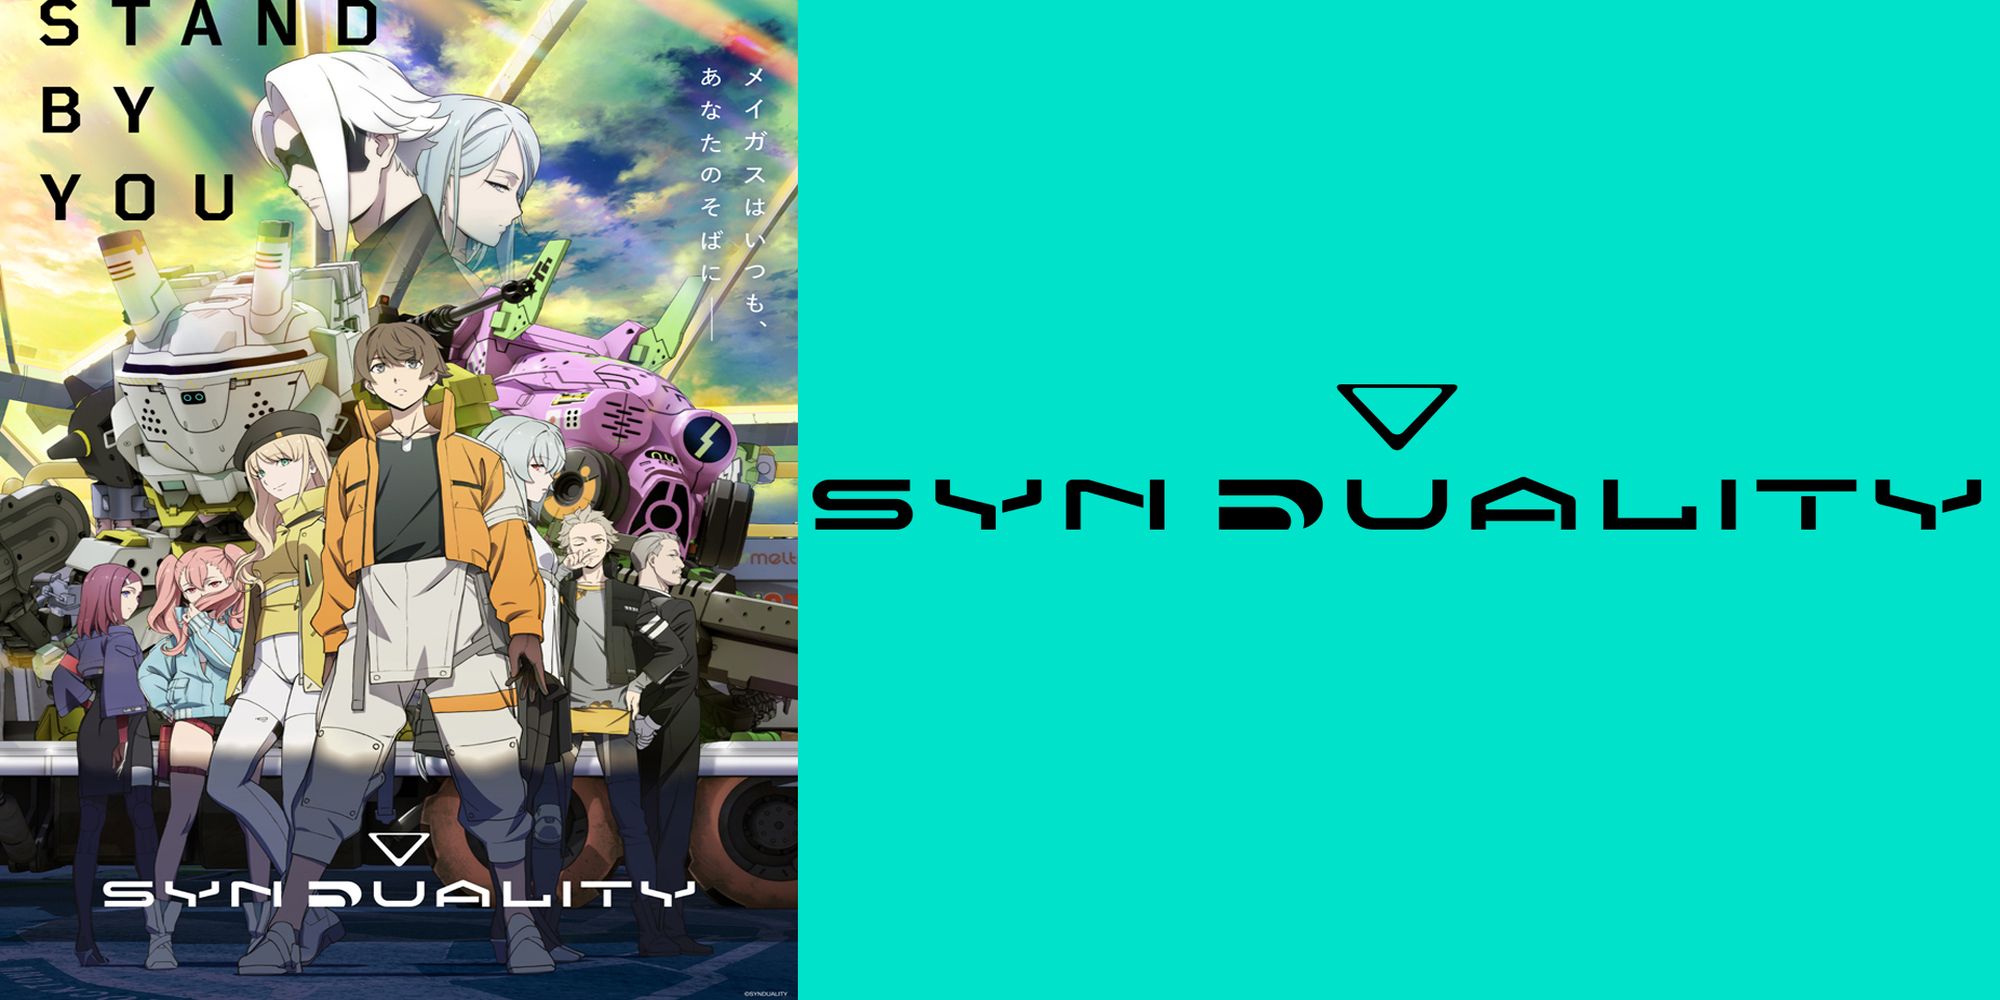 A group of humans and humanoids start together in new Synduality visual.